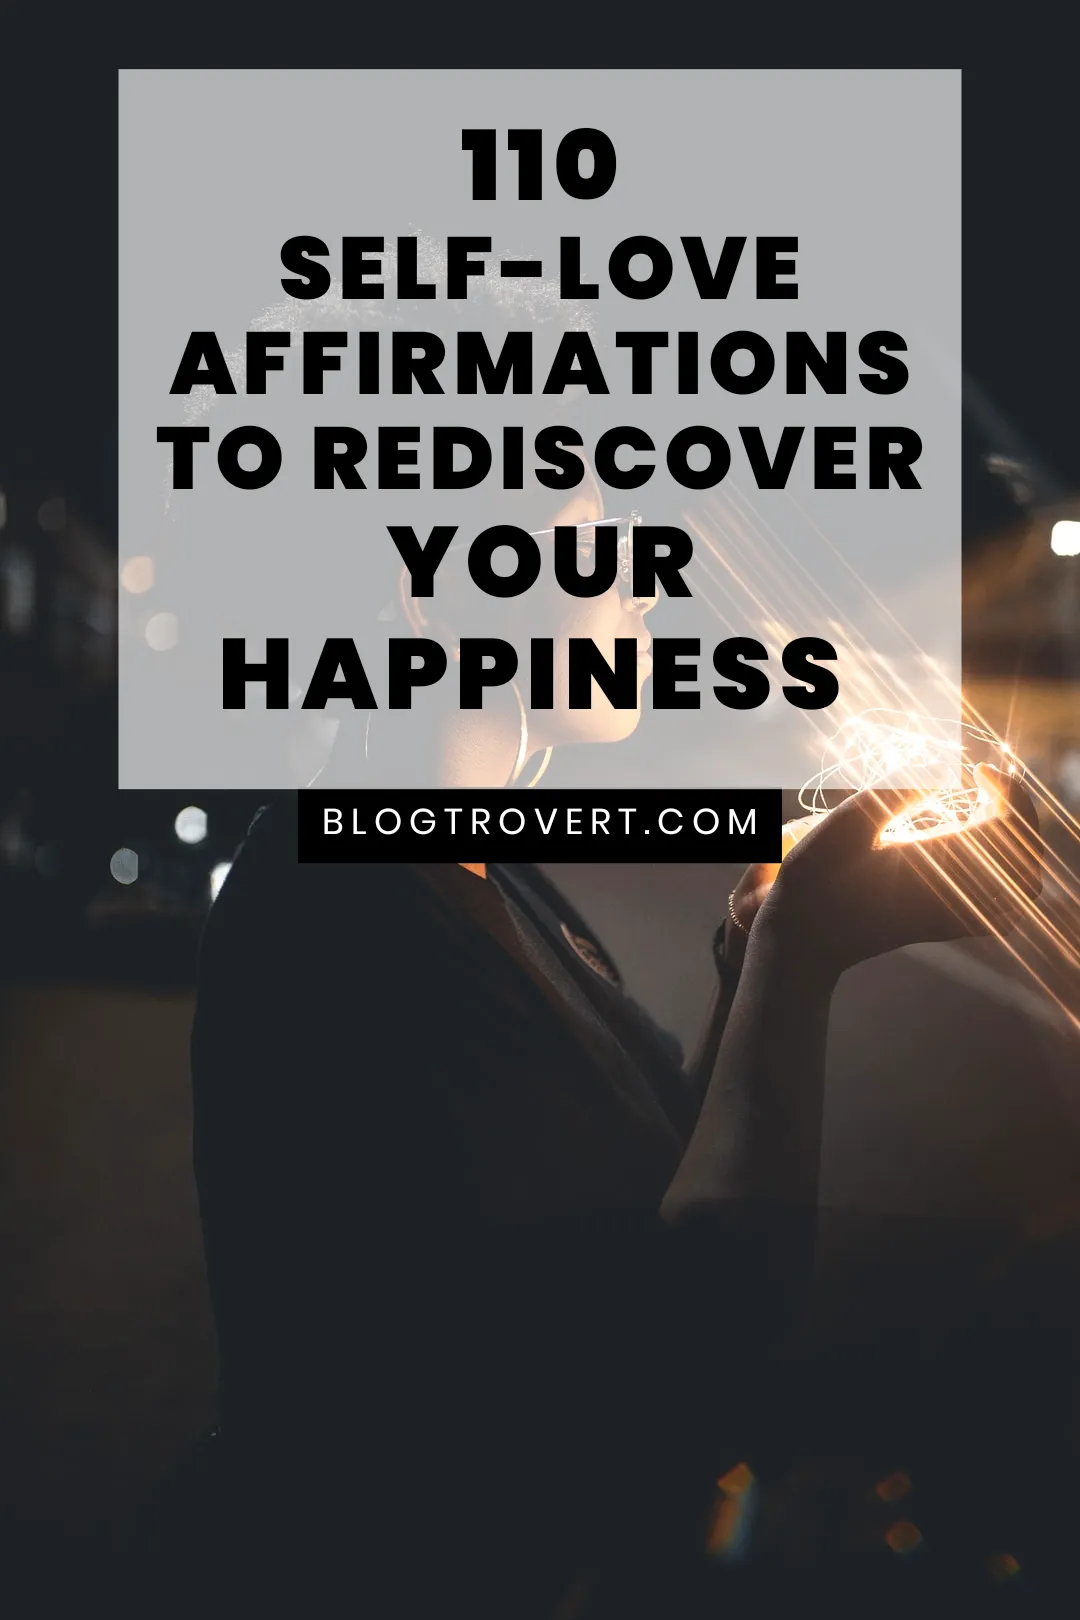 110 powerful affirmations for self-love 2